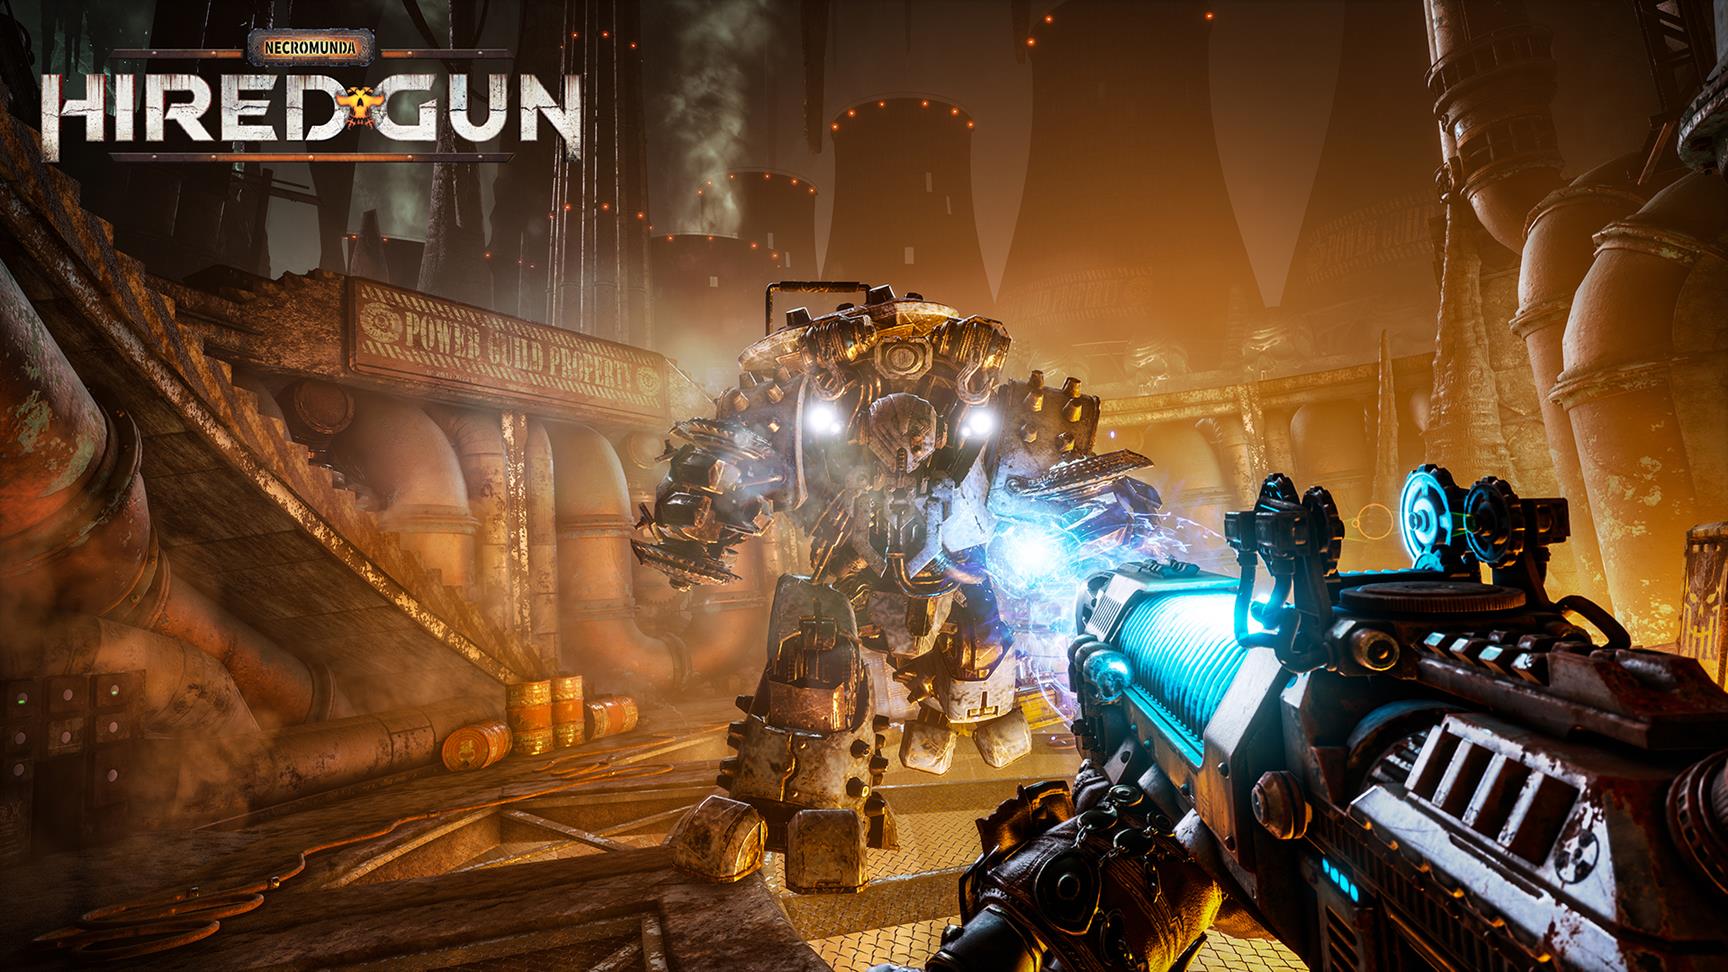 Image for Necromunda: Hired Gun is Doom meets Dishonored in Warhammer 40K